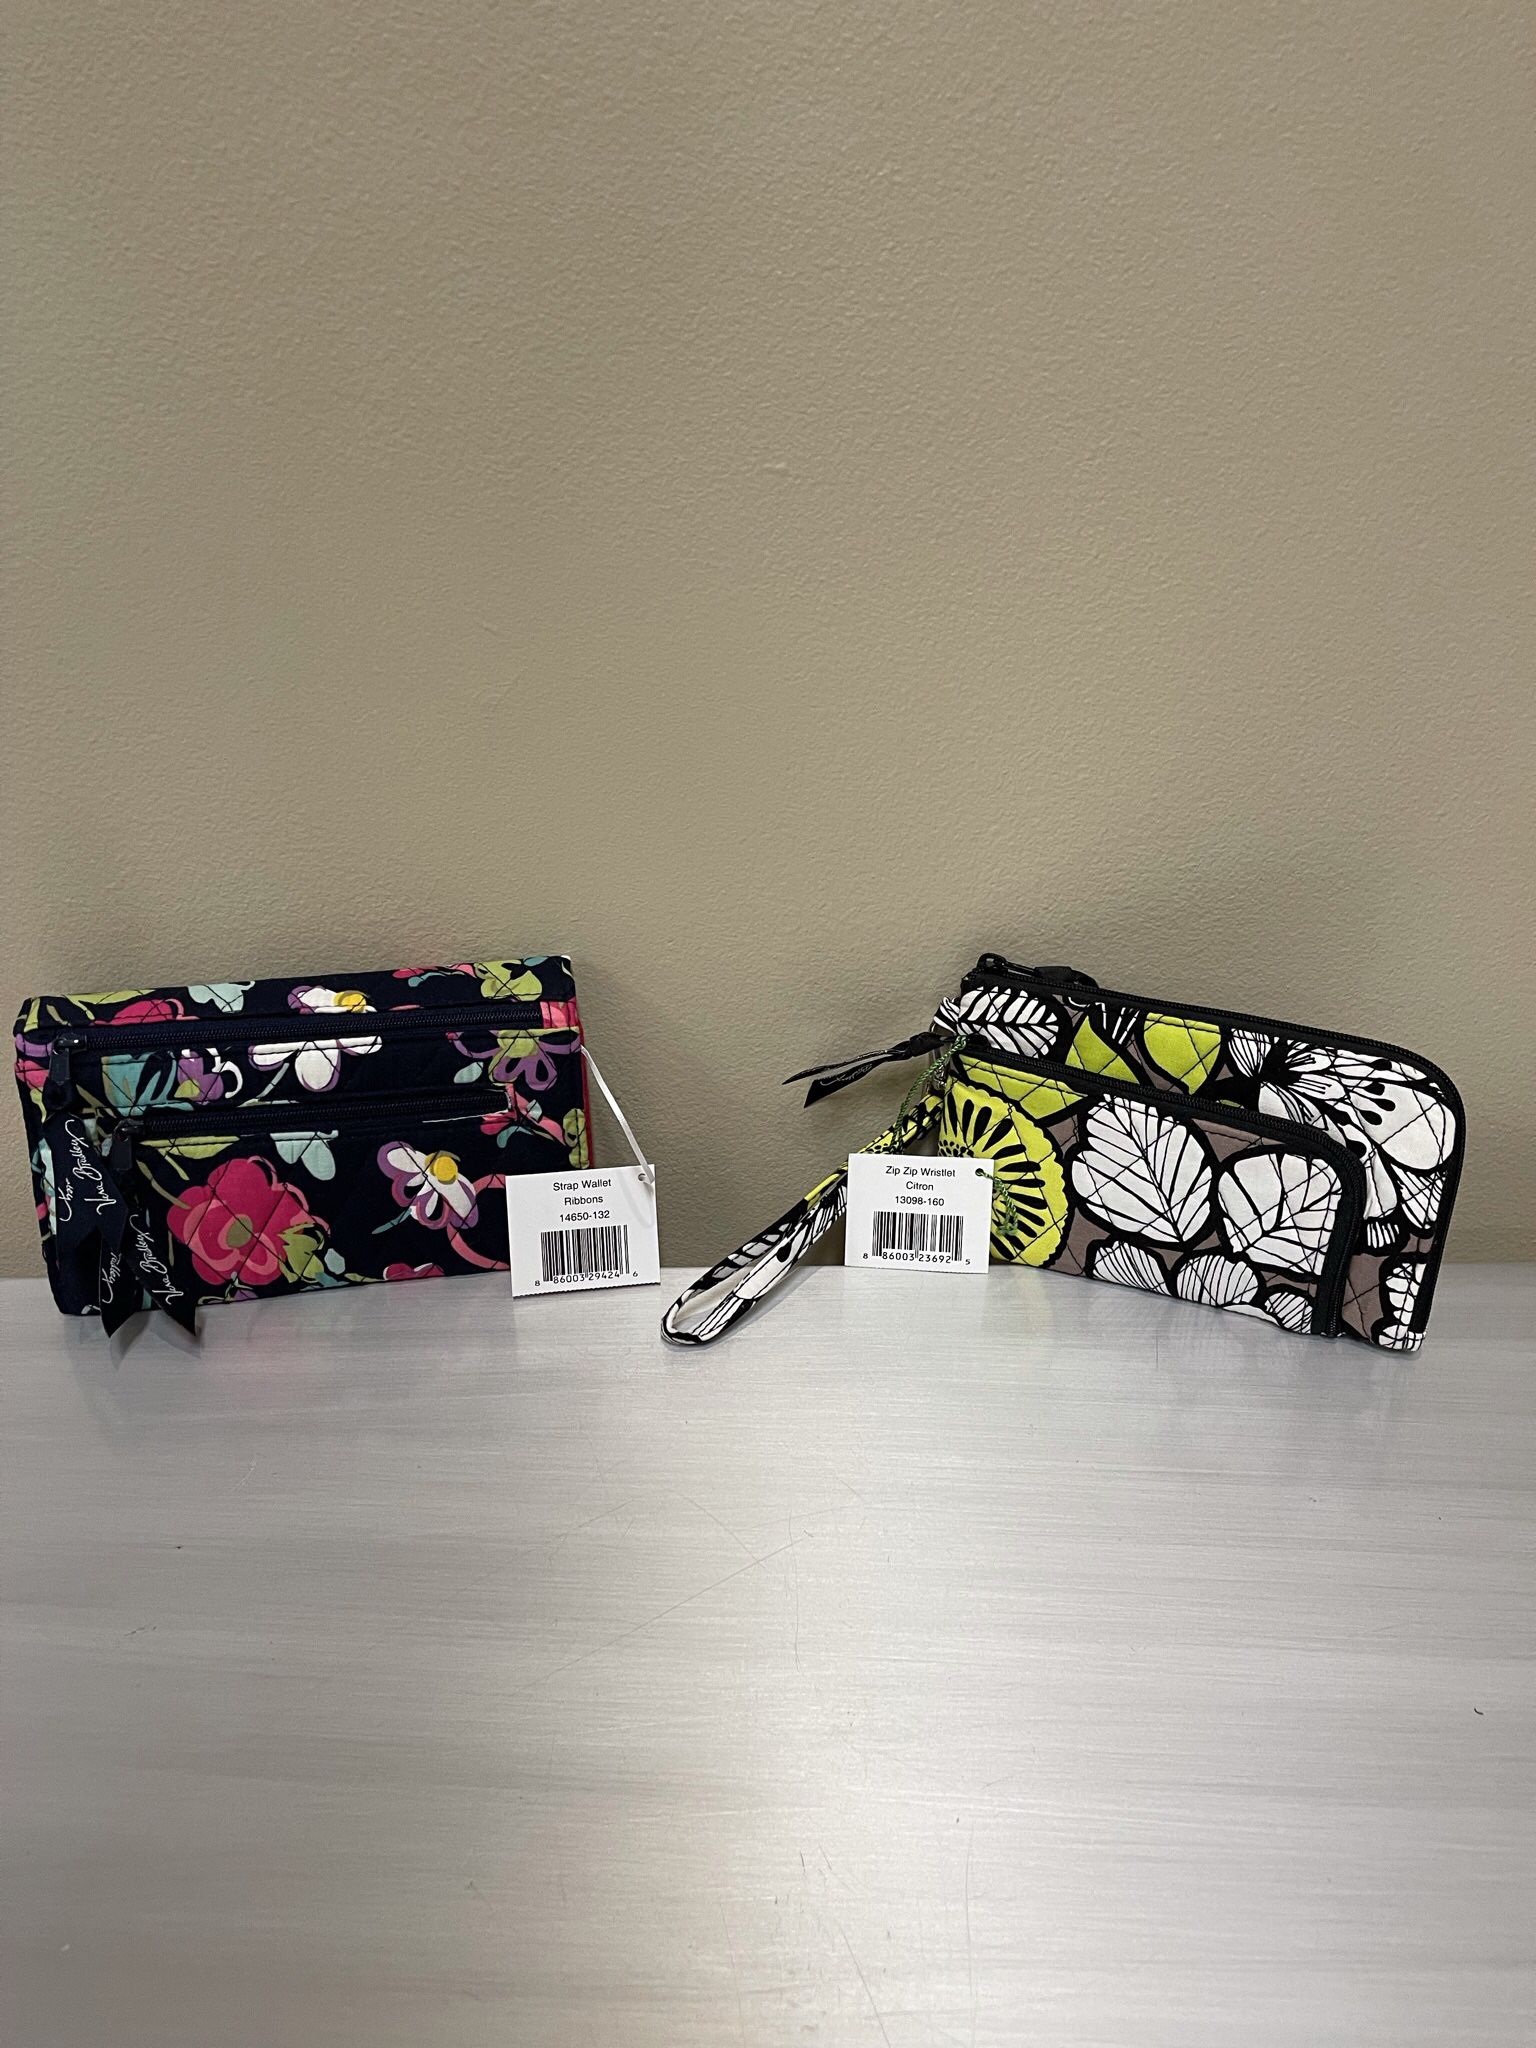 NEW!! VERA BRADLEY Fabric WALLETS / PURSES - firm price for both together